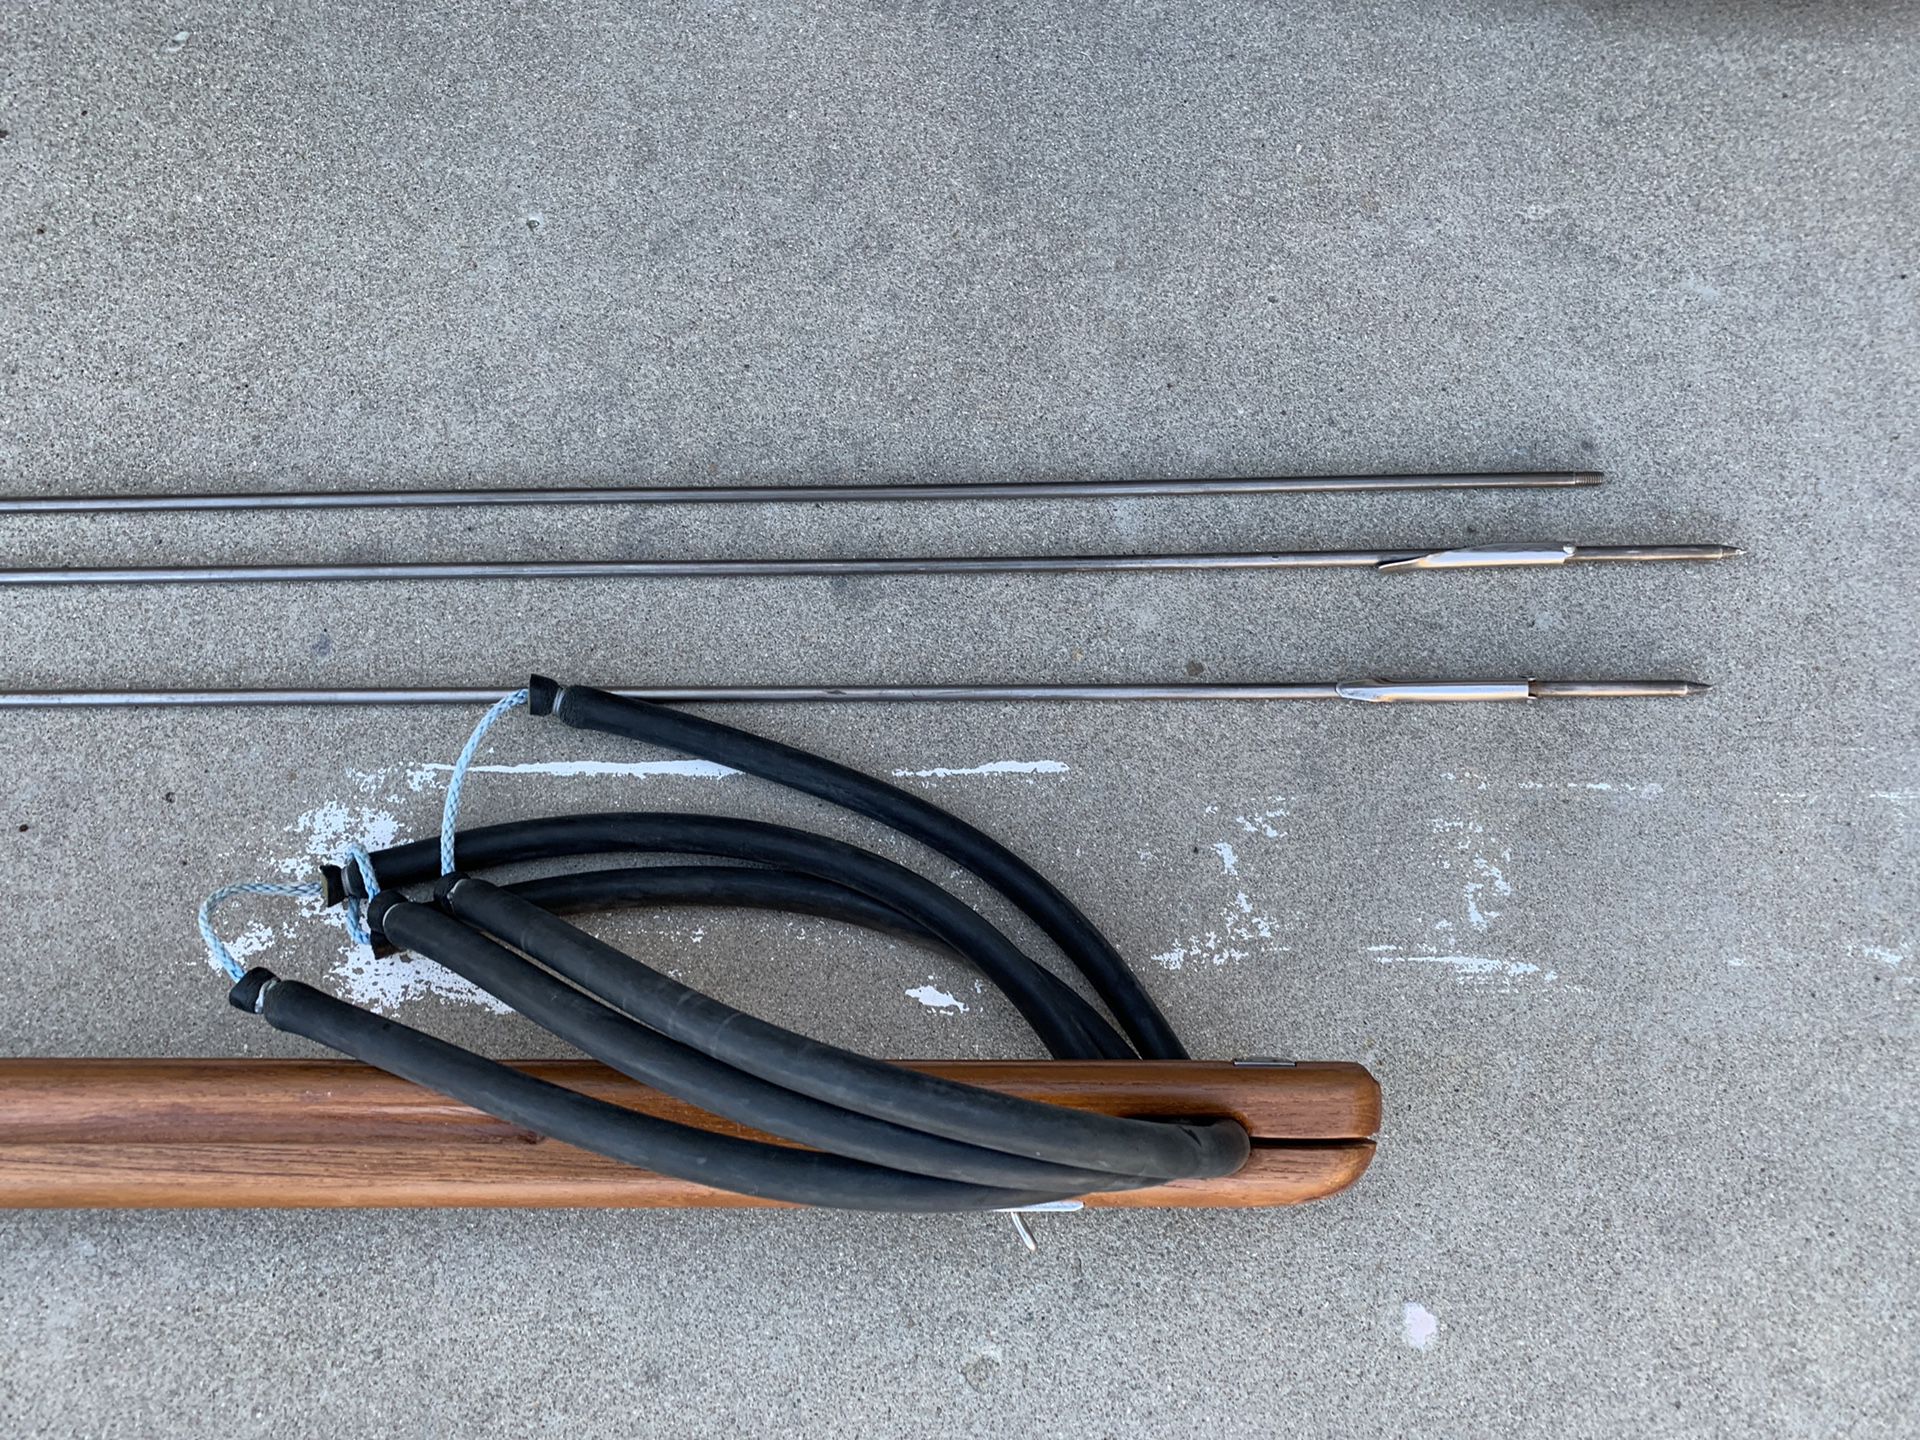 50 Foot Spear Fishing Float Line for Sale in Sacramento, CA - OfferUp